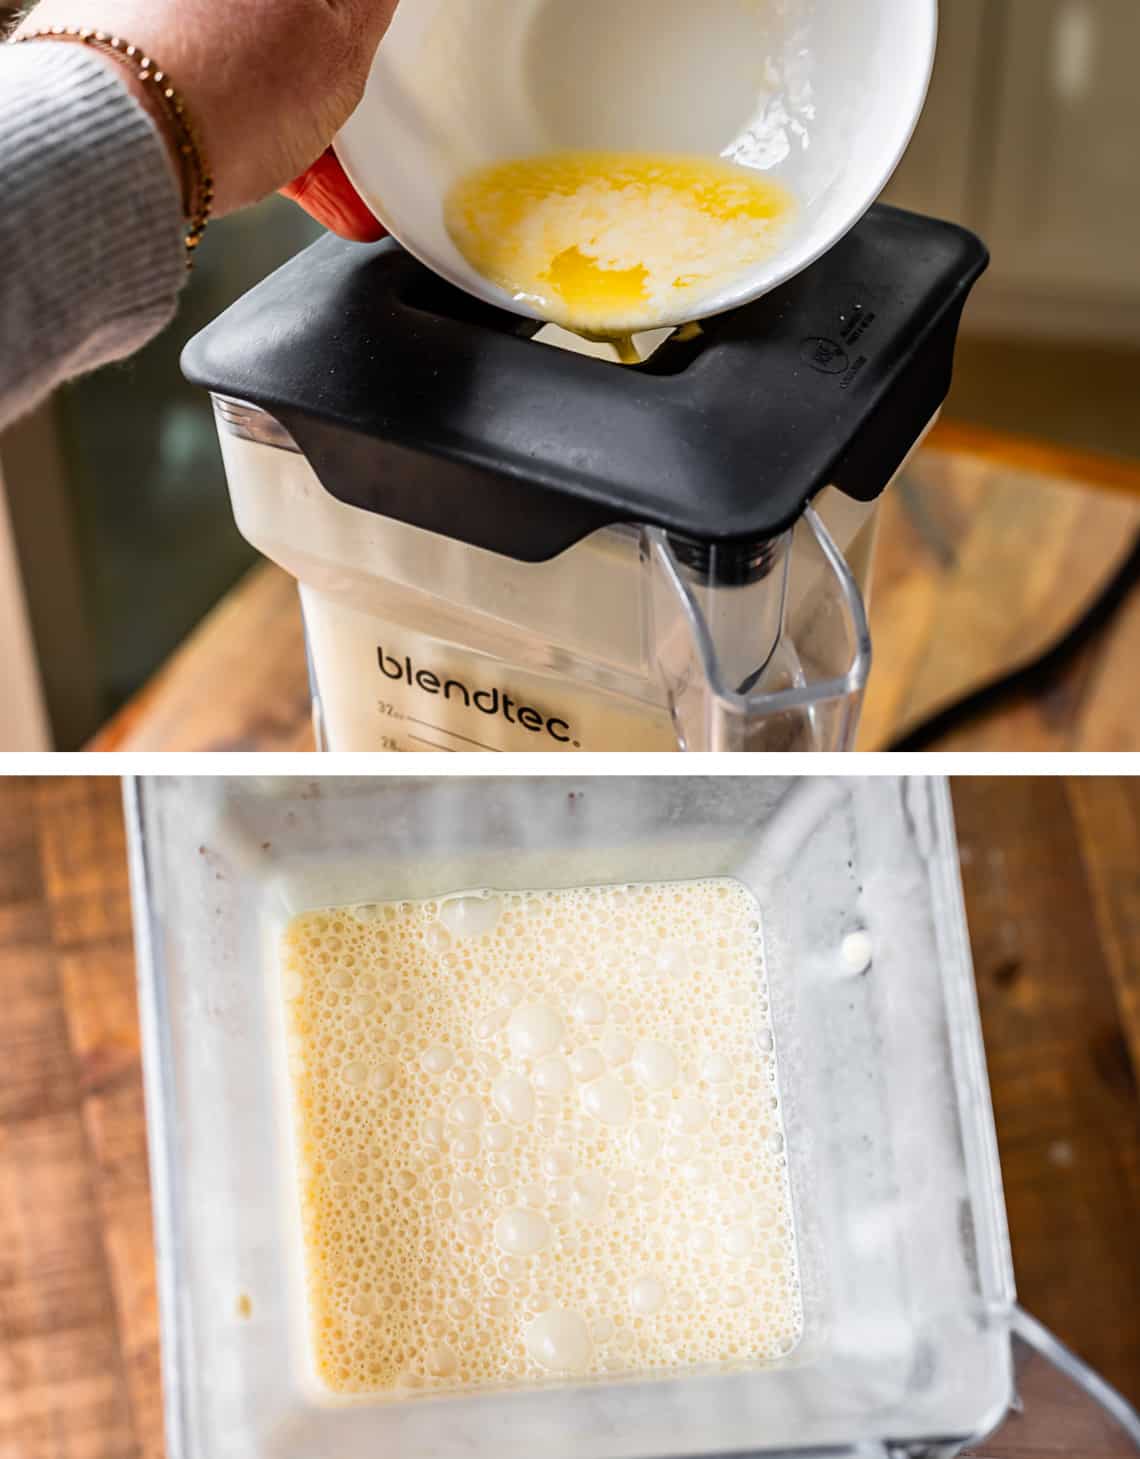 top adding melted butter to the blender while it runs on low, bottom all blended and ready.